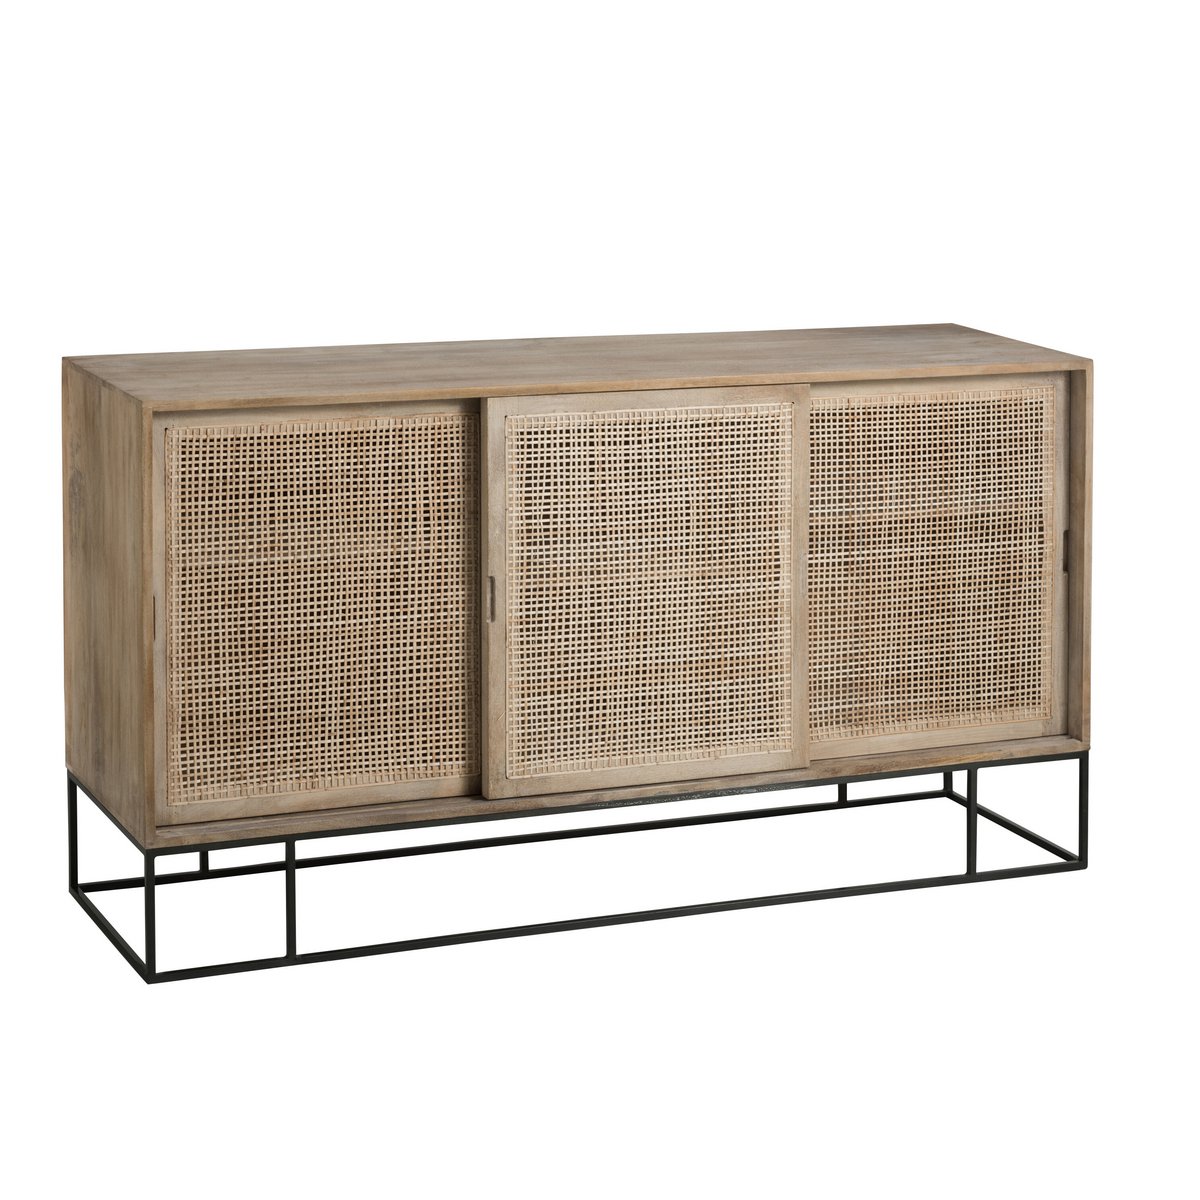 J-Line cabinet in woven cane - 3 sliding doors - wood/metal - natural ND